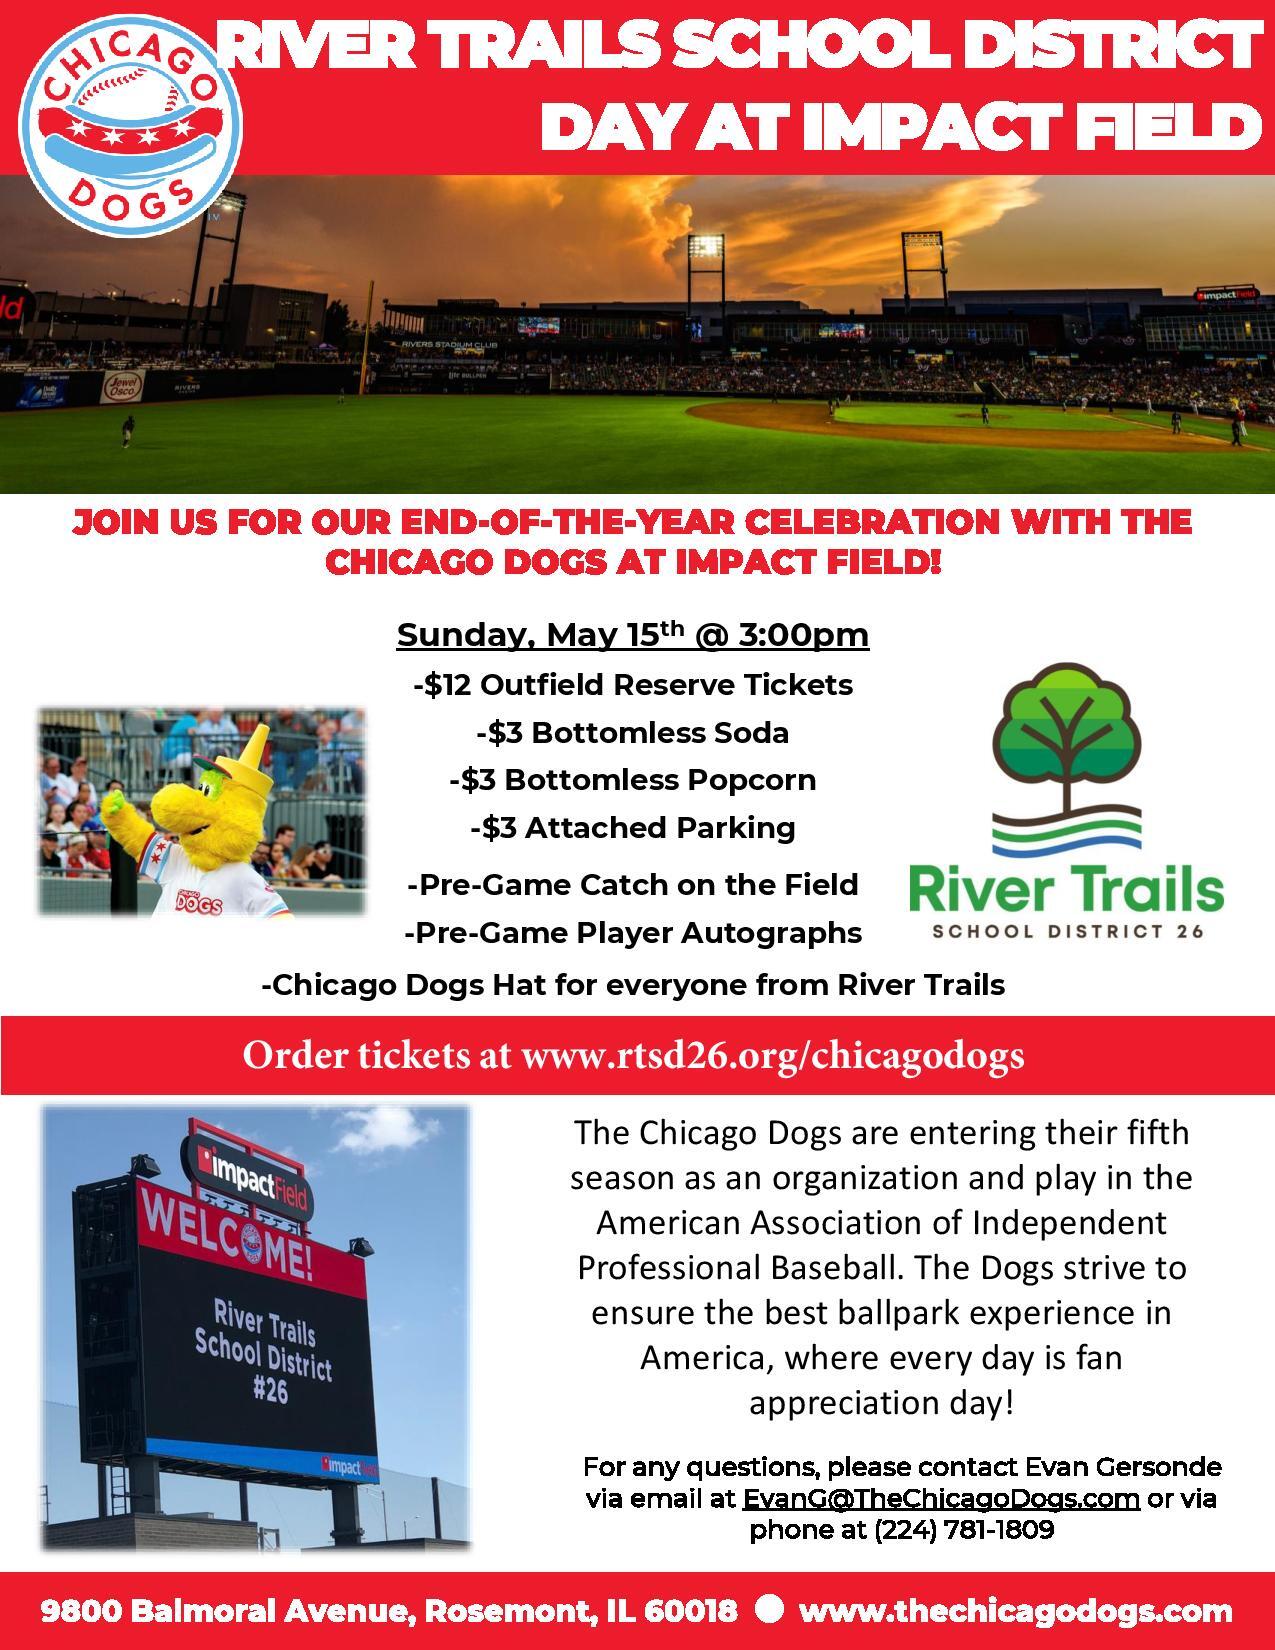 Details on RTSD26 Day at the Chicago Dogs field